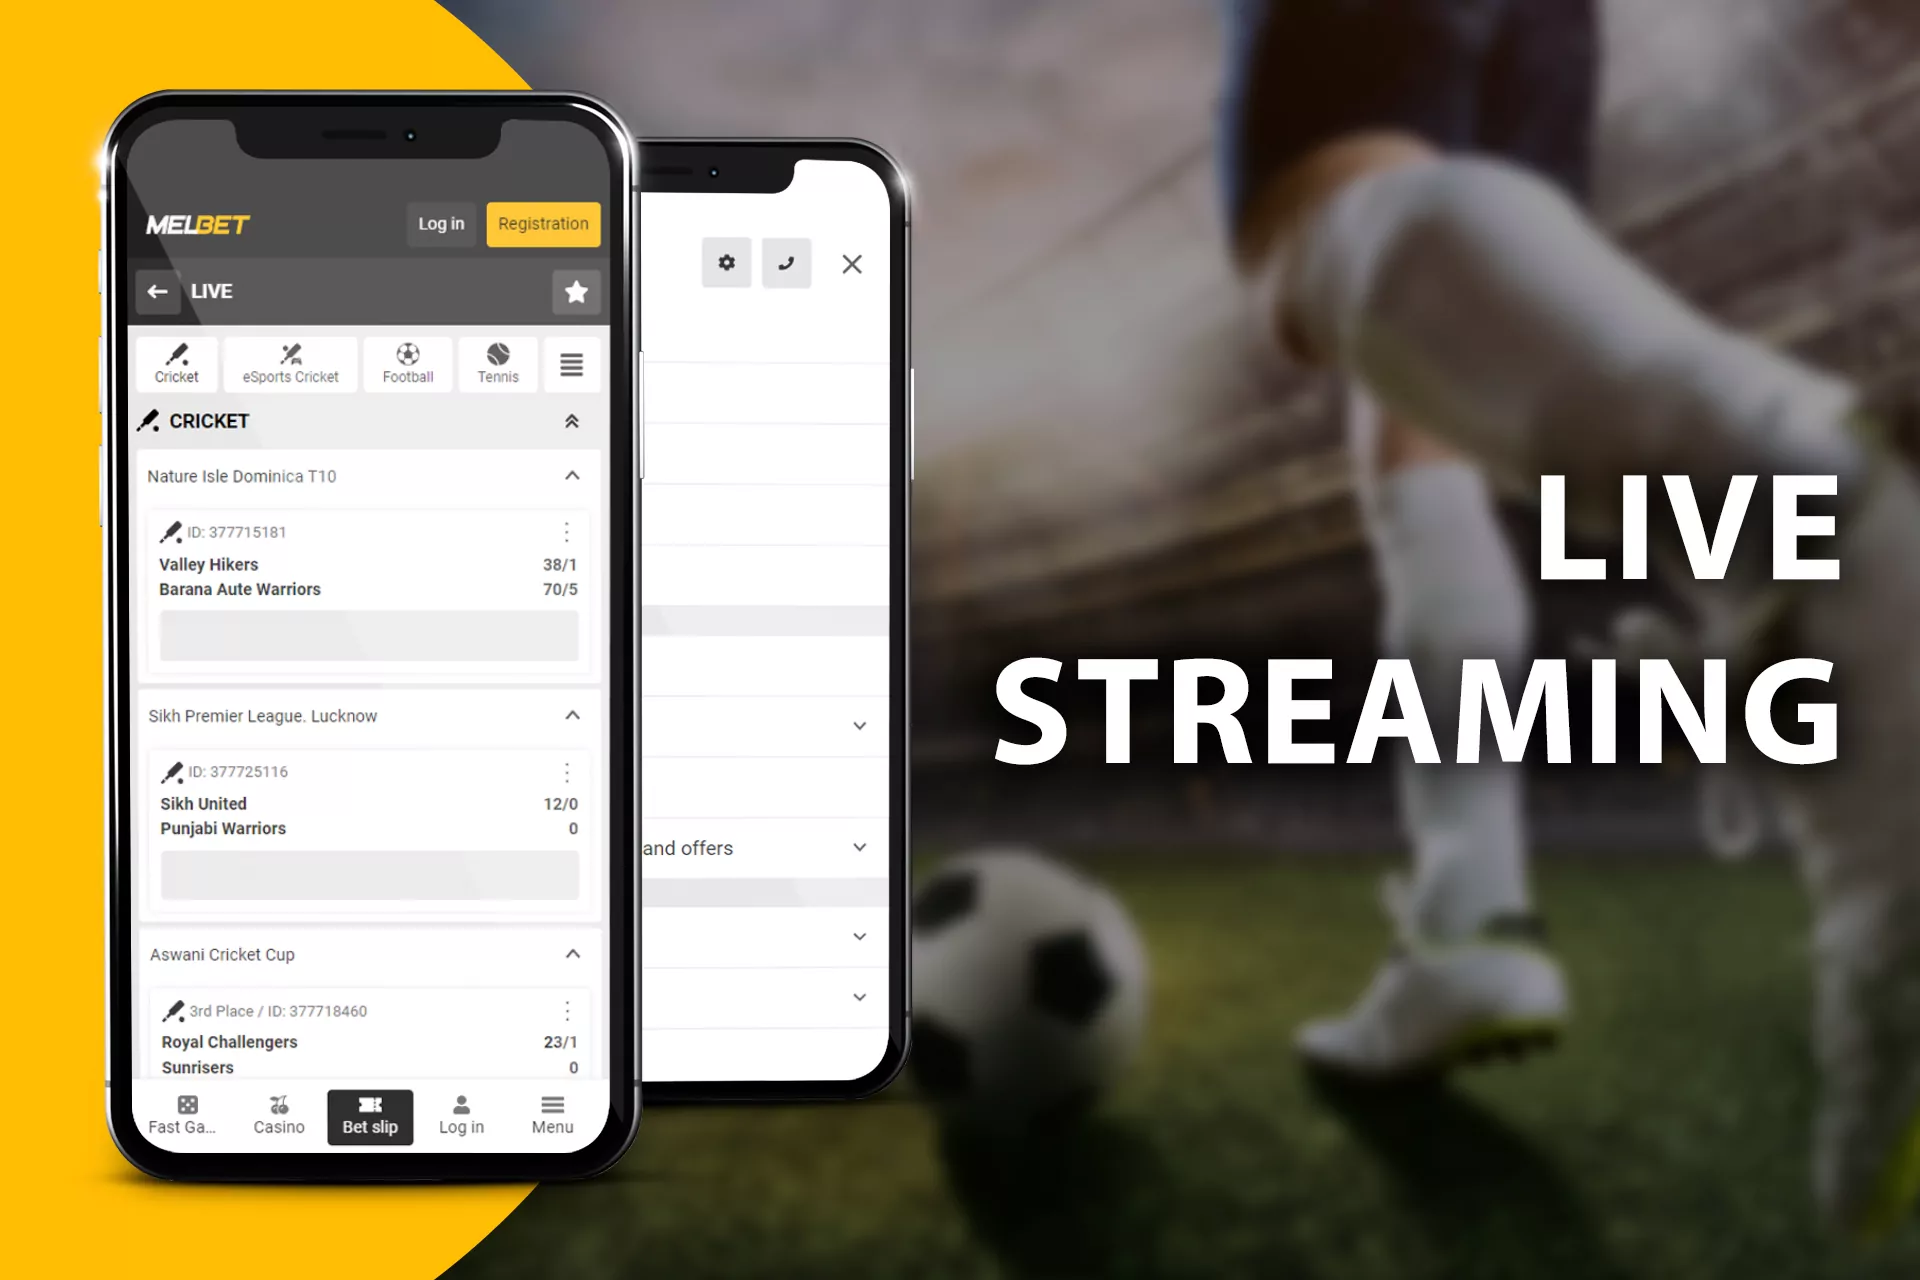 Follow live broadcasts of sports events in the Live section.